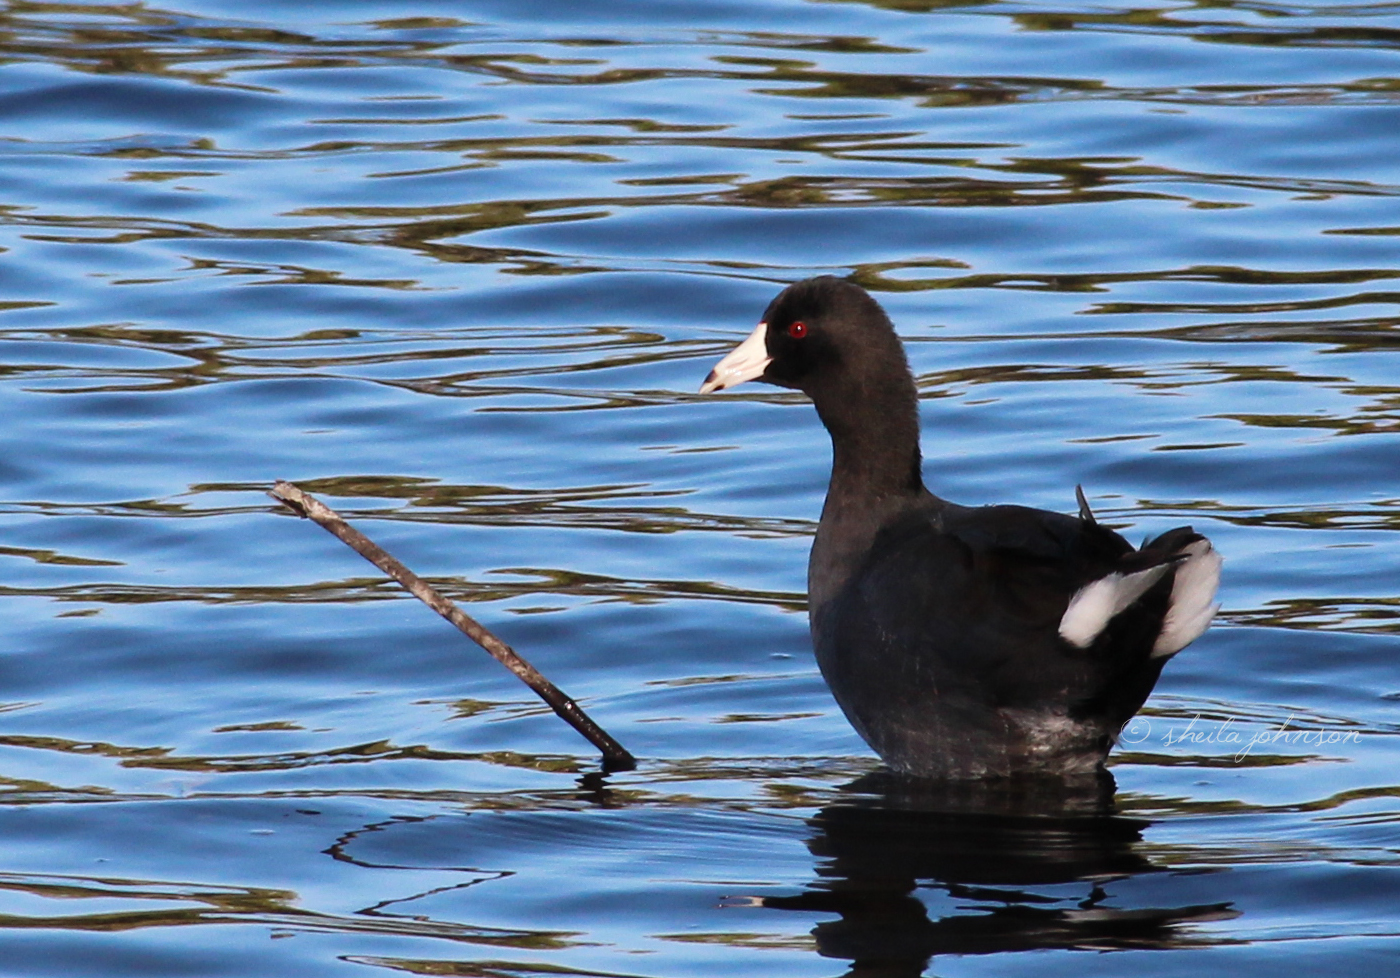 The American Coot Is One Of Few Florida Birds Which Sport Primarily Black Feathers. Though Often Mistaken For Ducks, They&Amp;Amp;#039;Re Not Even Related To Them. Coots Are In The Family Rallidae (Rails), Which Includes The Gallinules.